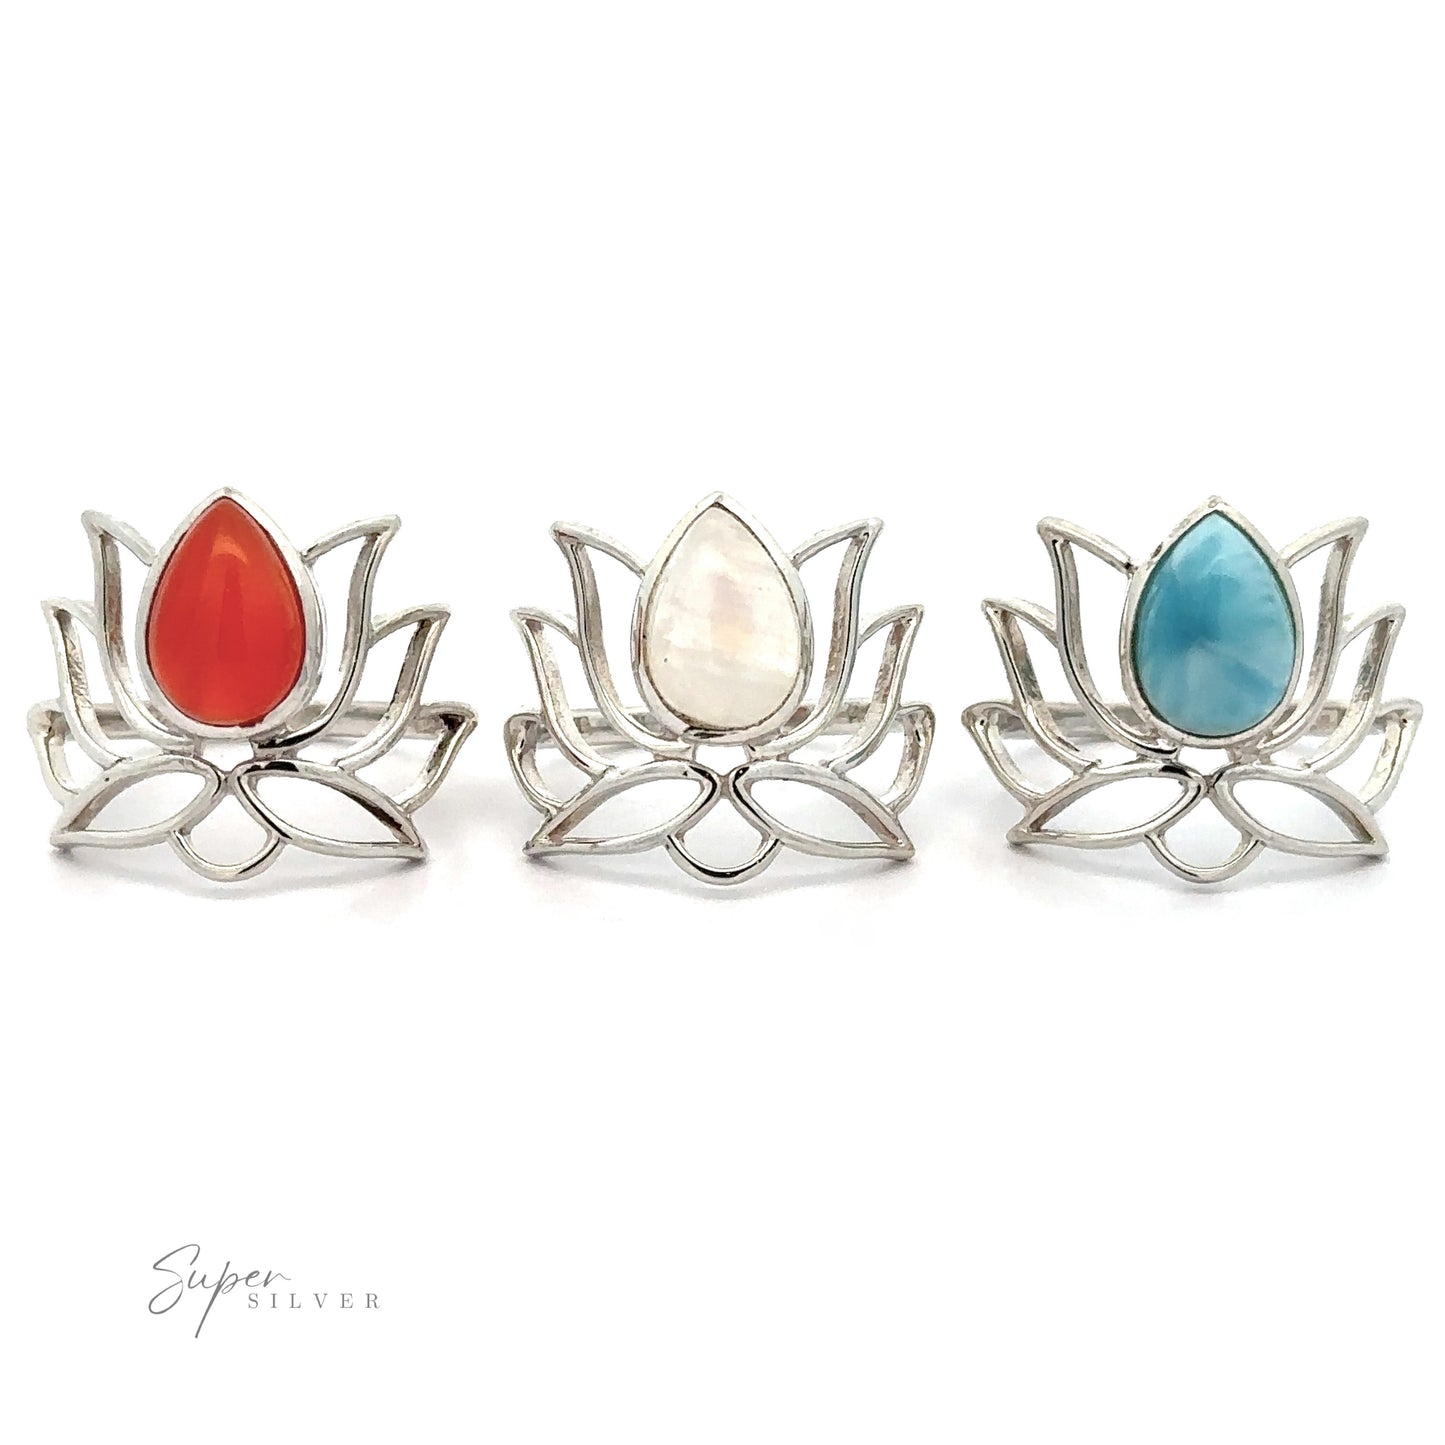 
                  
                    Three Online Exclusive Teardrop Stone Lotus Rings, each set with a different colored teardrop gemstone (orange, white, and blue) displayed against a white background.
                  
                